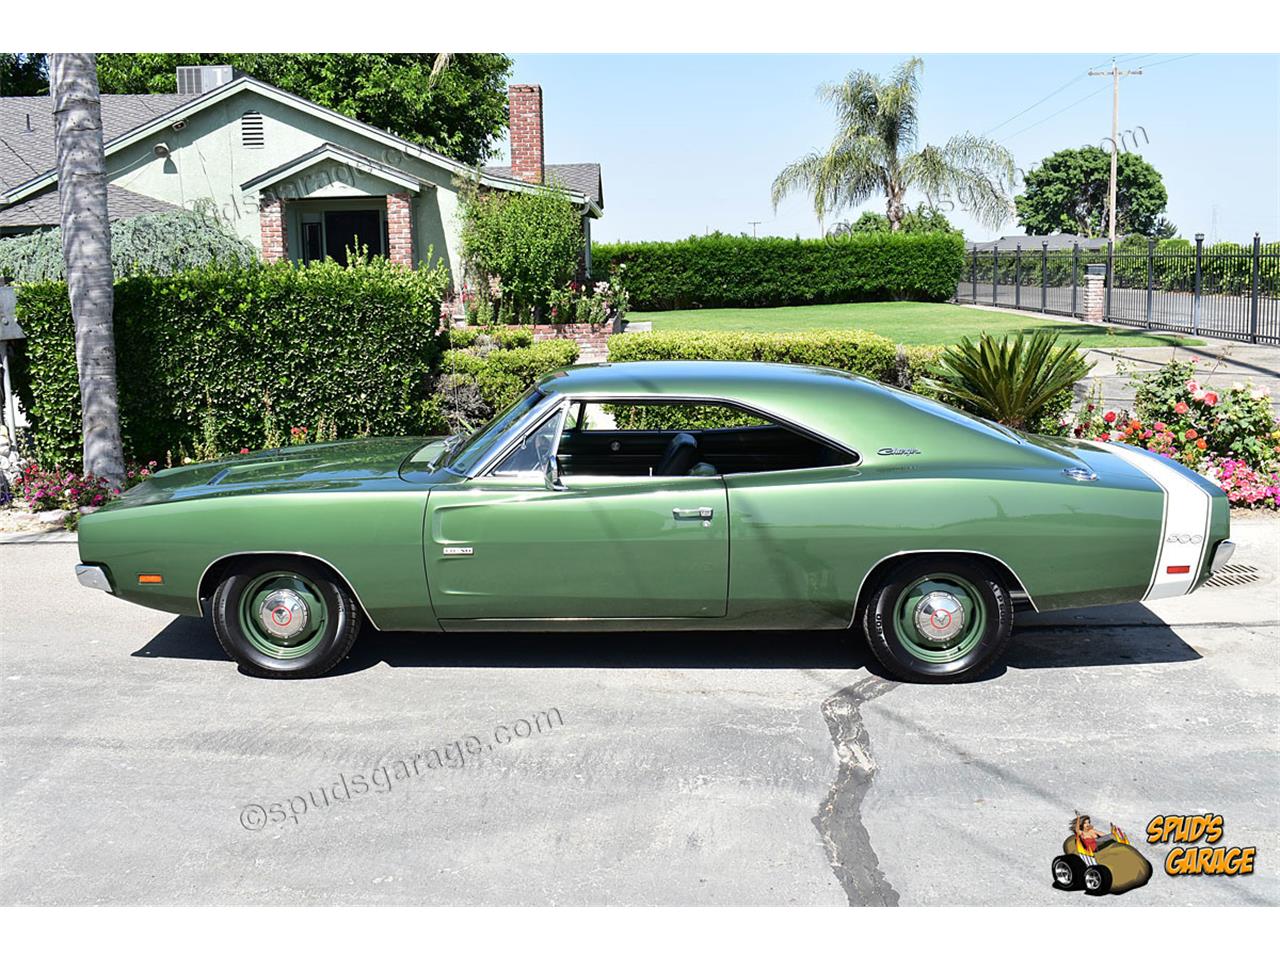 For Sale: 1969 Dodge Charger 500 in Fresno, California for sale in Fresno, CA